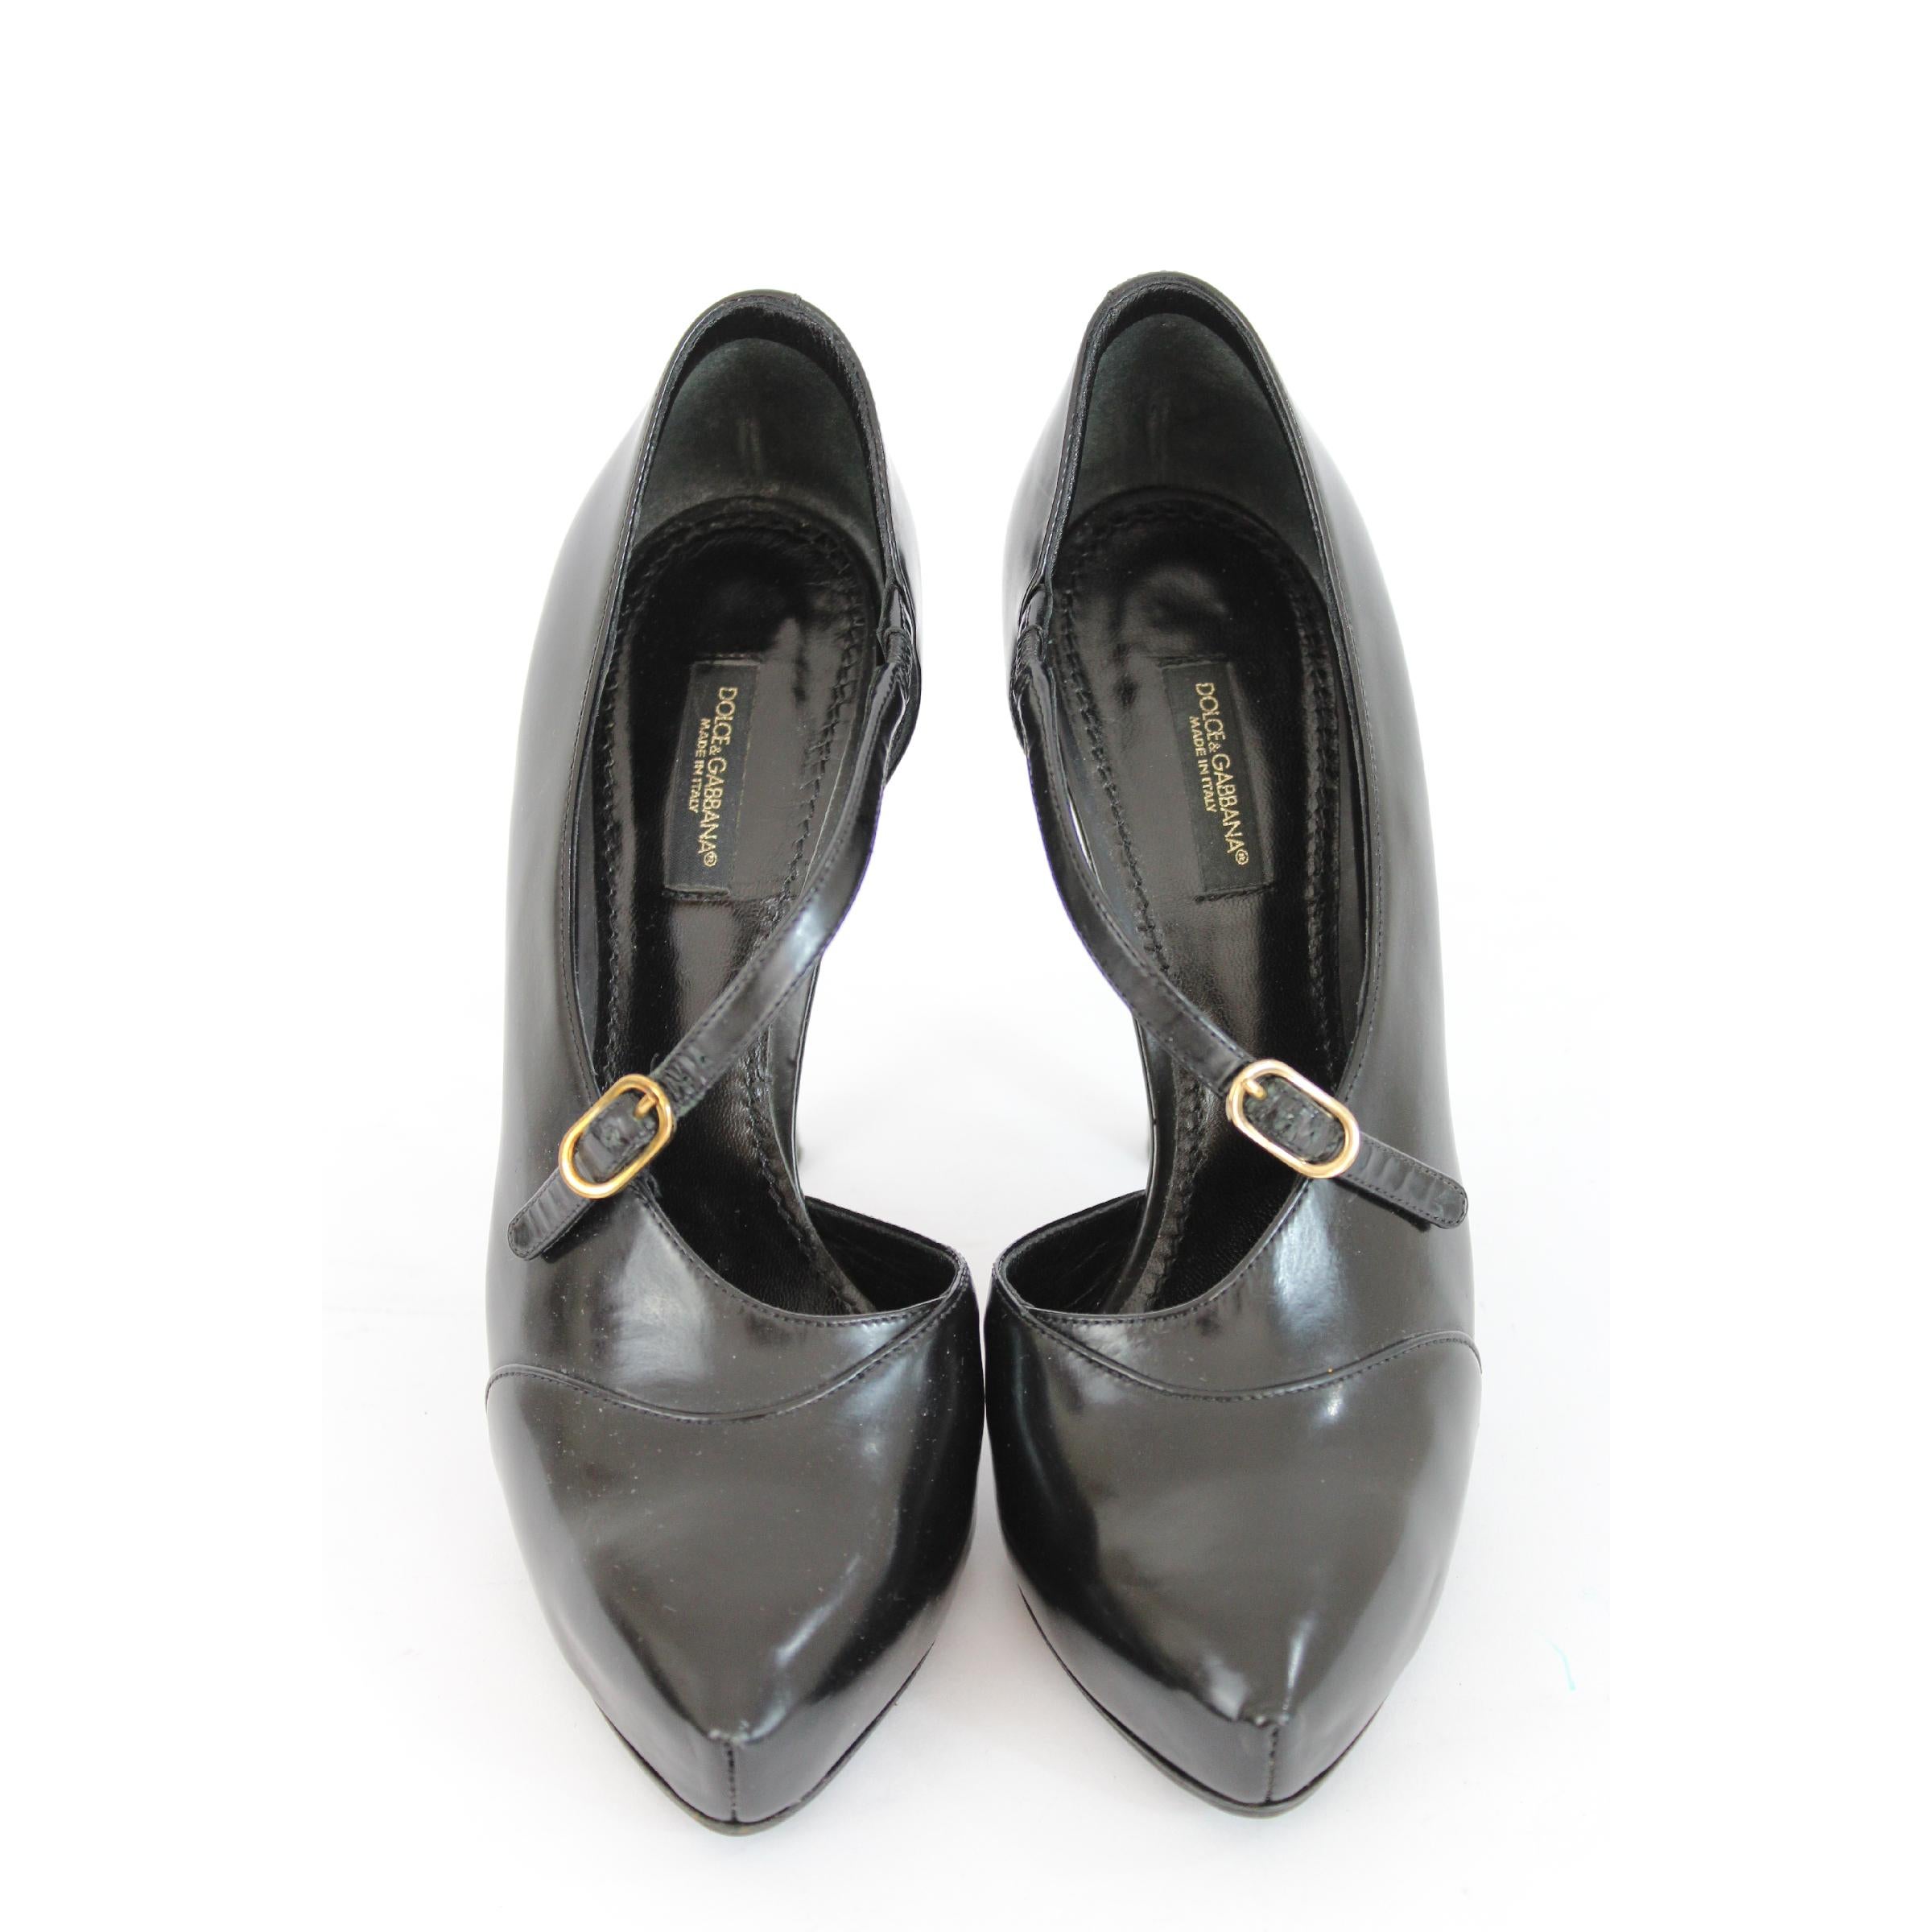 Dolce & Gabbana vintage women's shoes. Decollete black, 100% patent leather. High heel, closure with adjustable band. Code: 1196.2000s. Made in Italy. Excellent vintage conditions.

Size: 37 It 6.5 Us 4 Uk

Heel height: 12 cm